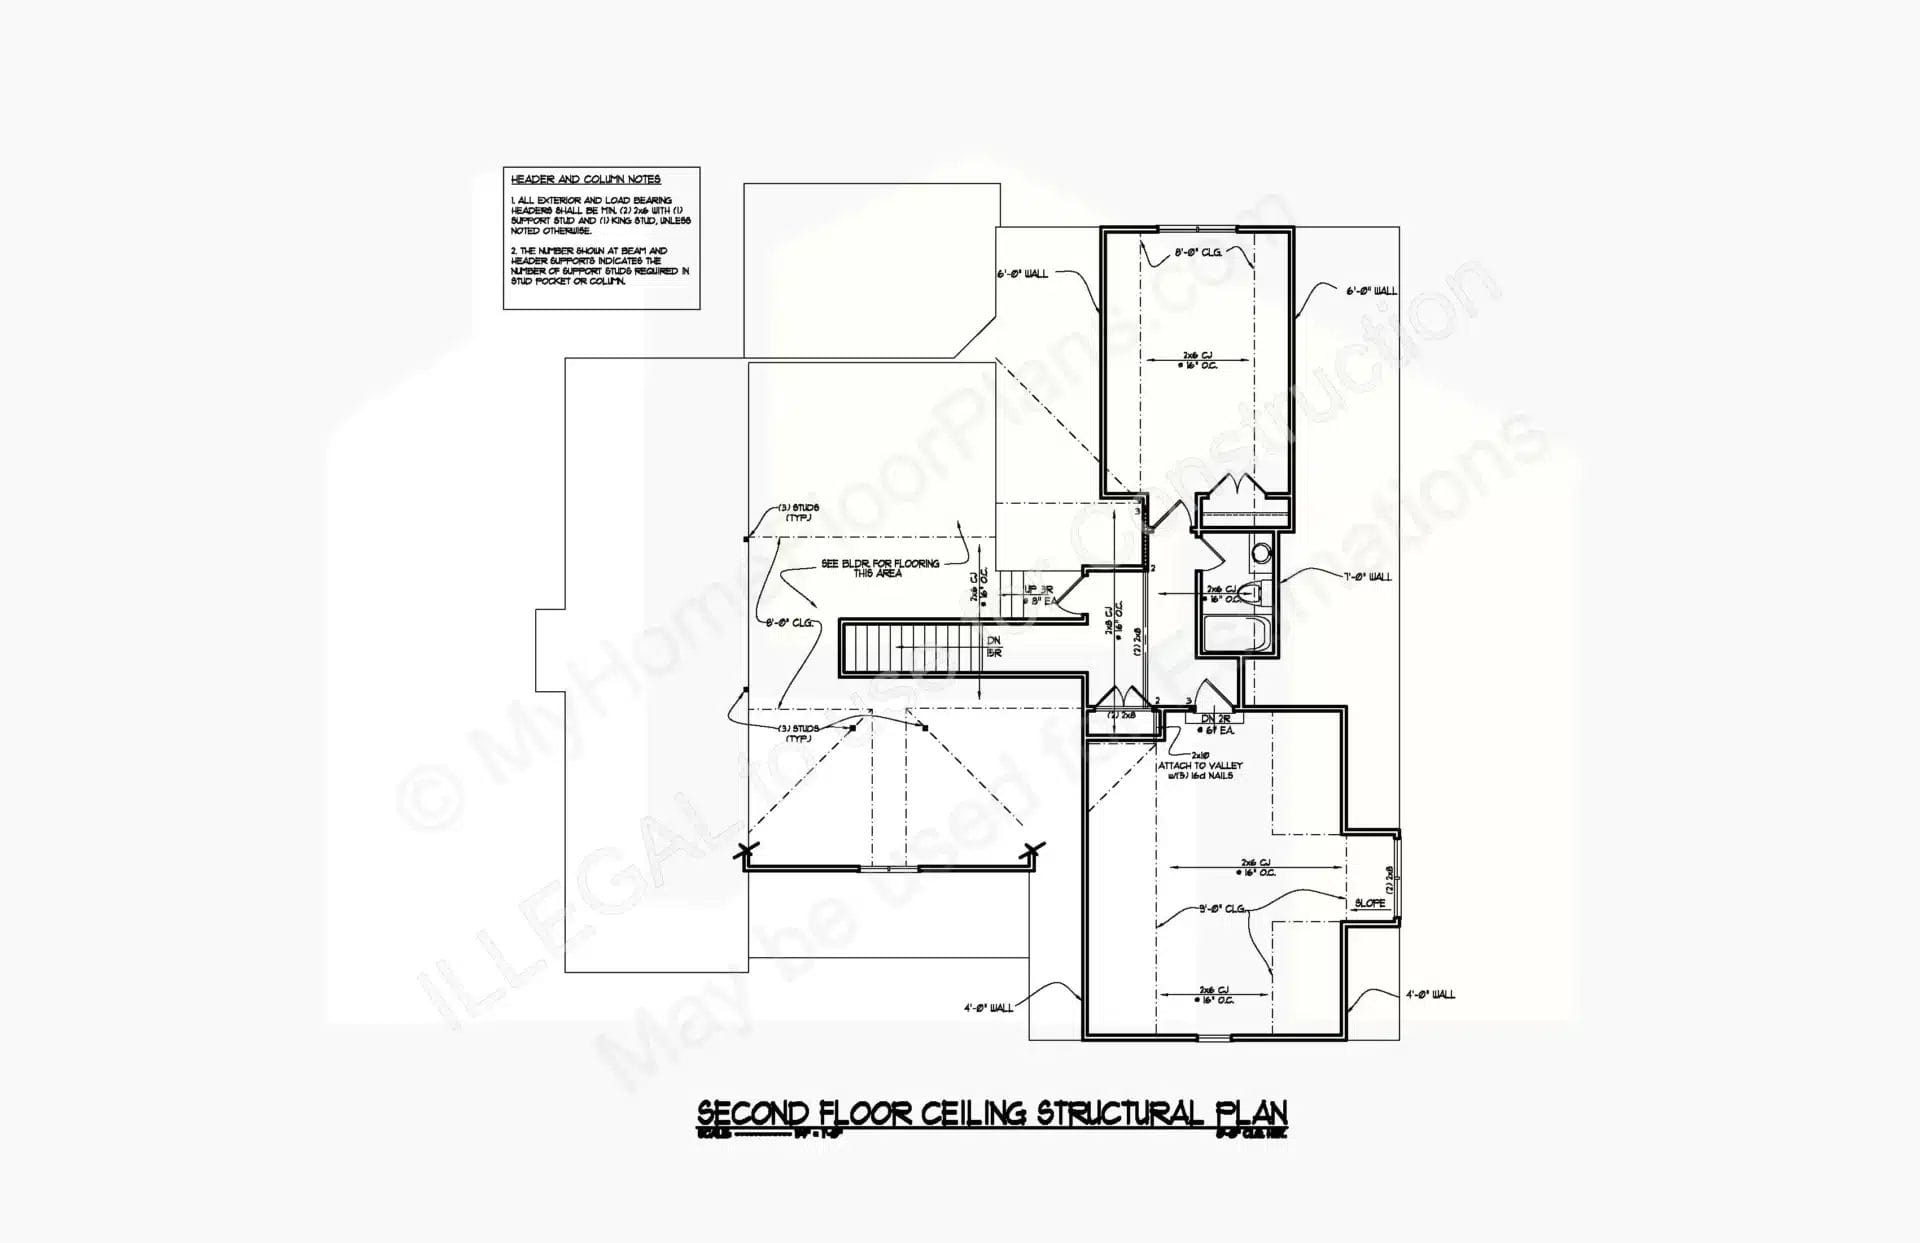 This image presents a detailed architectural design of a home's second-floor ceiling structural plan for the 12-2289. The plan includes labeled sections, dimensions, and annotations providing specific building instructions and material details.